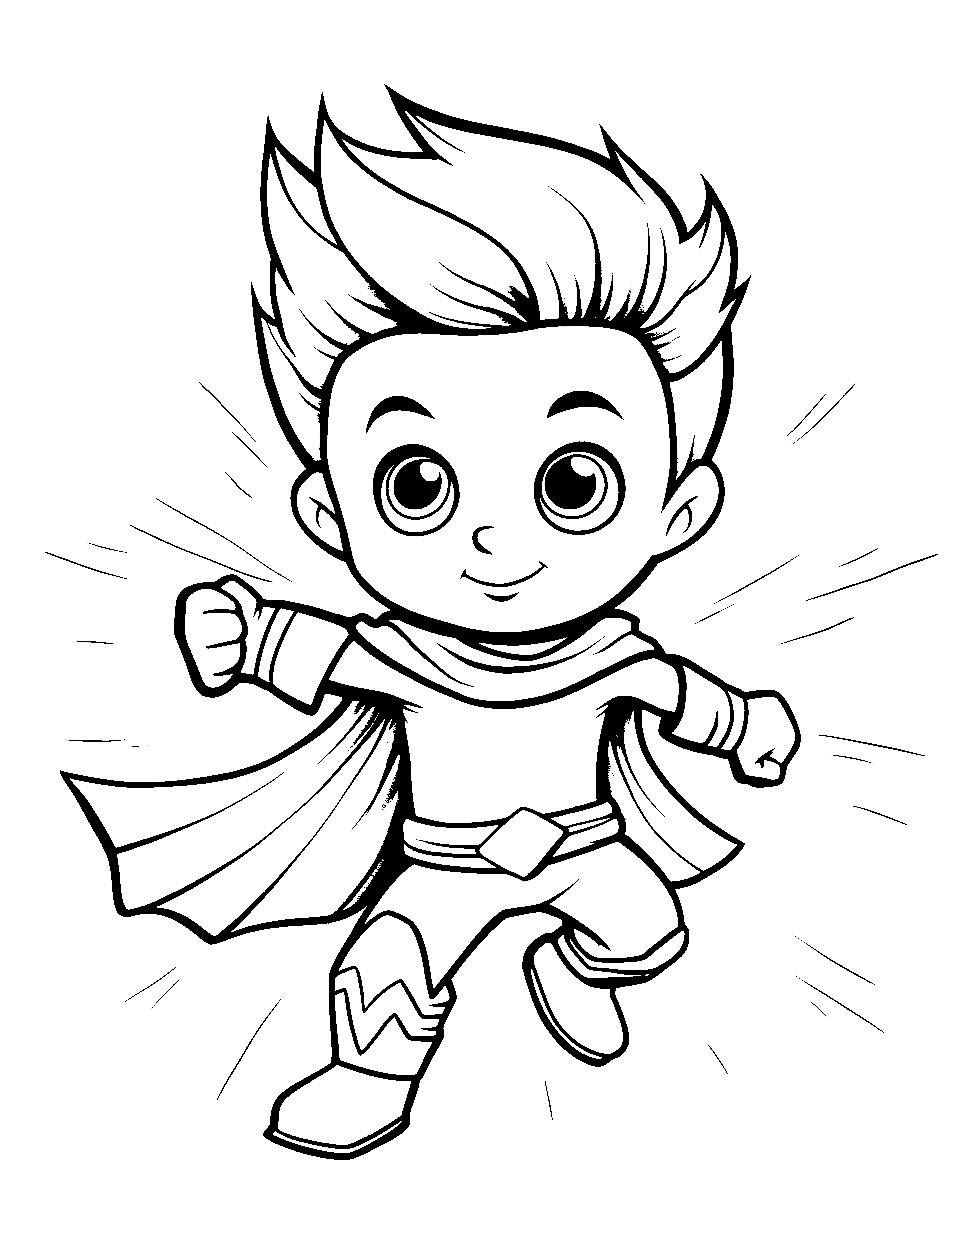 Action Figure Adventure Coloring Page - An action figure doing a heroic pose.